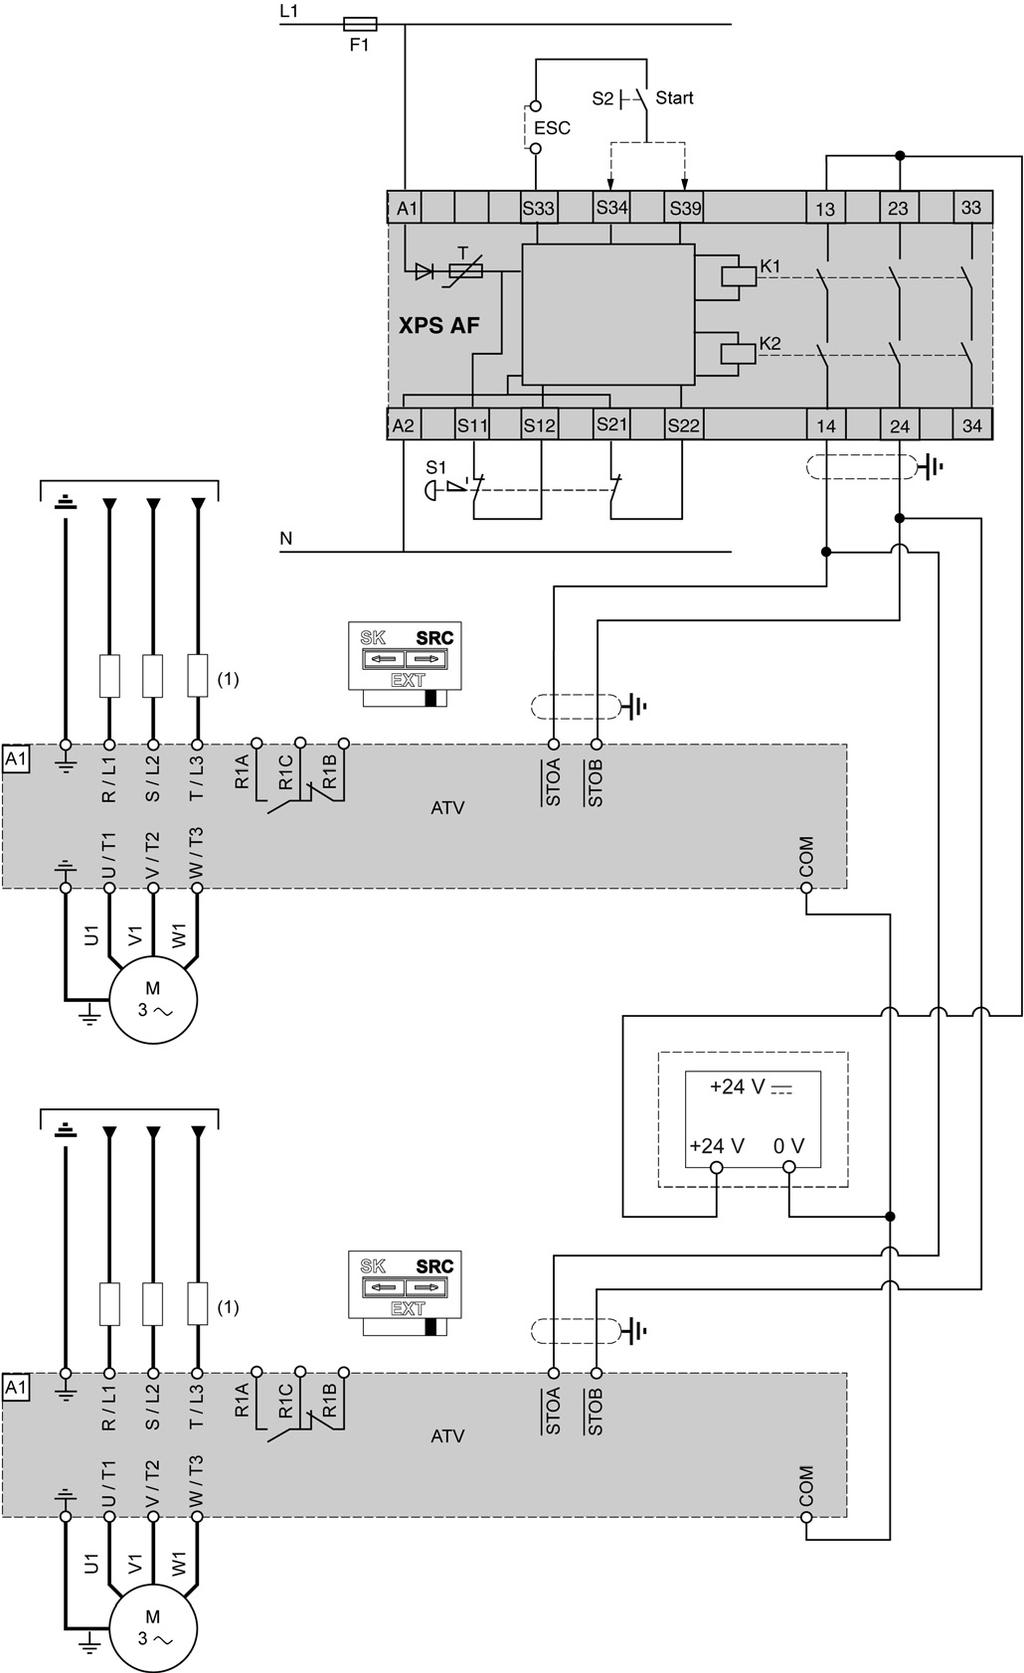 Multidrive with Safety Module Type Preventa XPS-AF Connection Diagram This connection diagram applies for a multidrive configuration with the safety